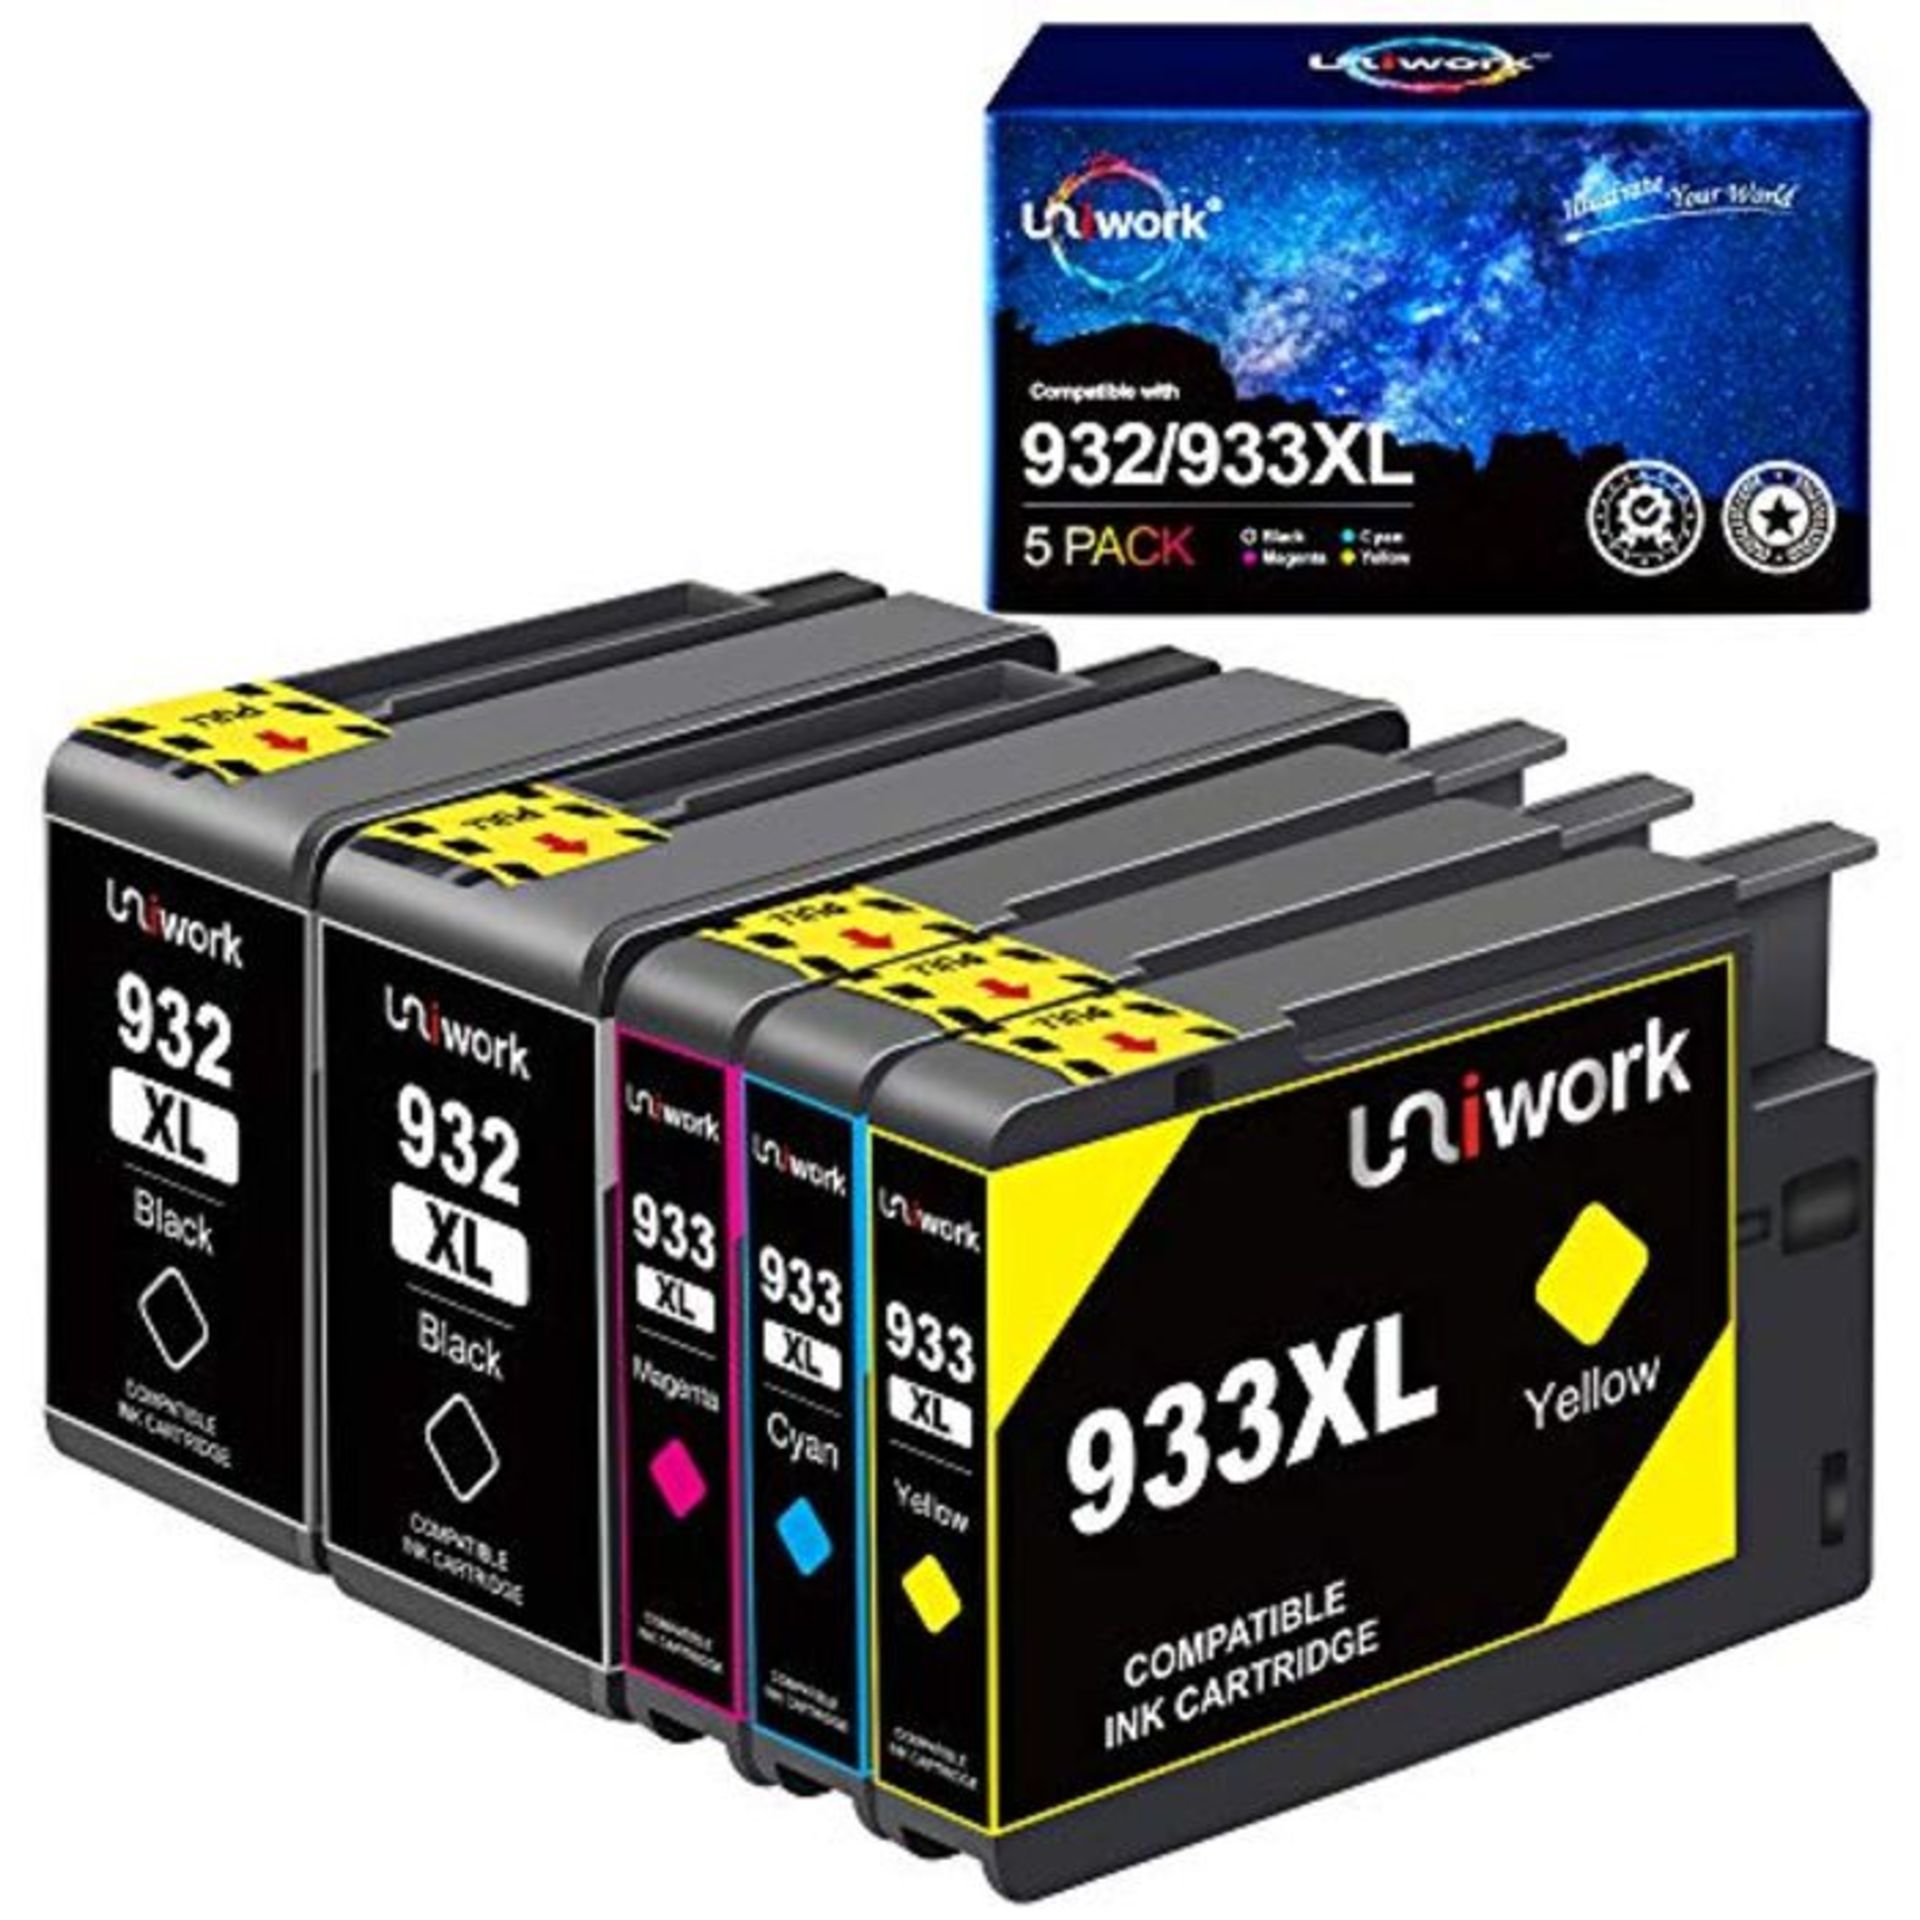 Uniwork Compatible Ink Cartridges for HP 932 933 932XL 933XL for HP Officejet 6100 660